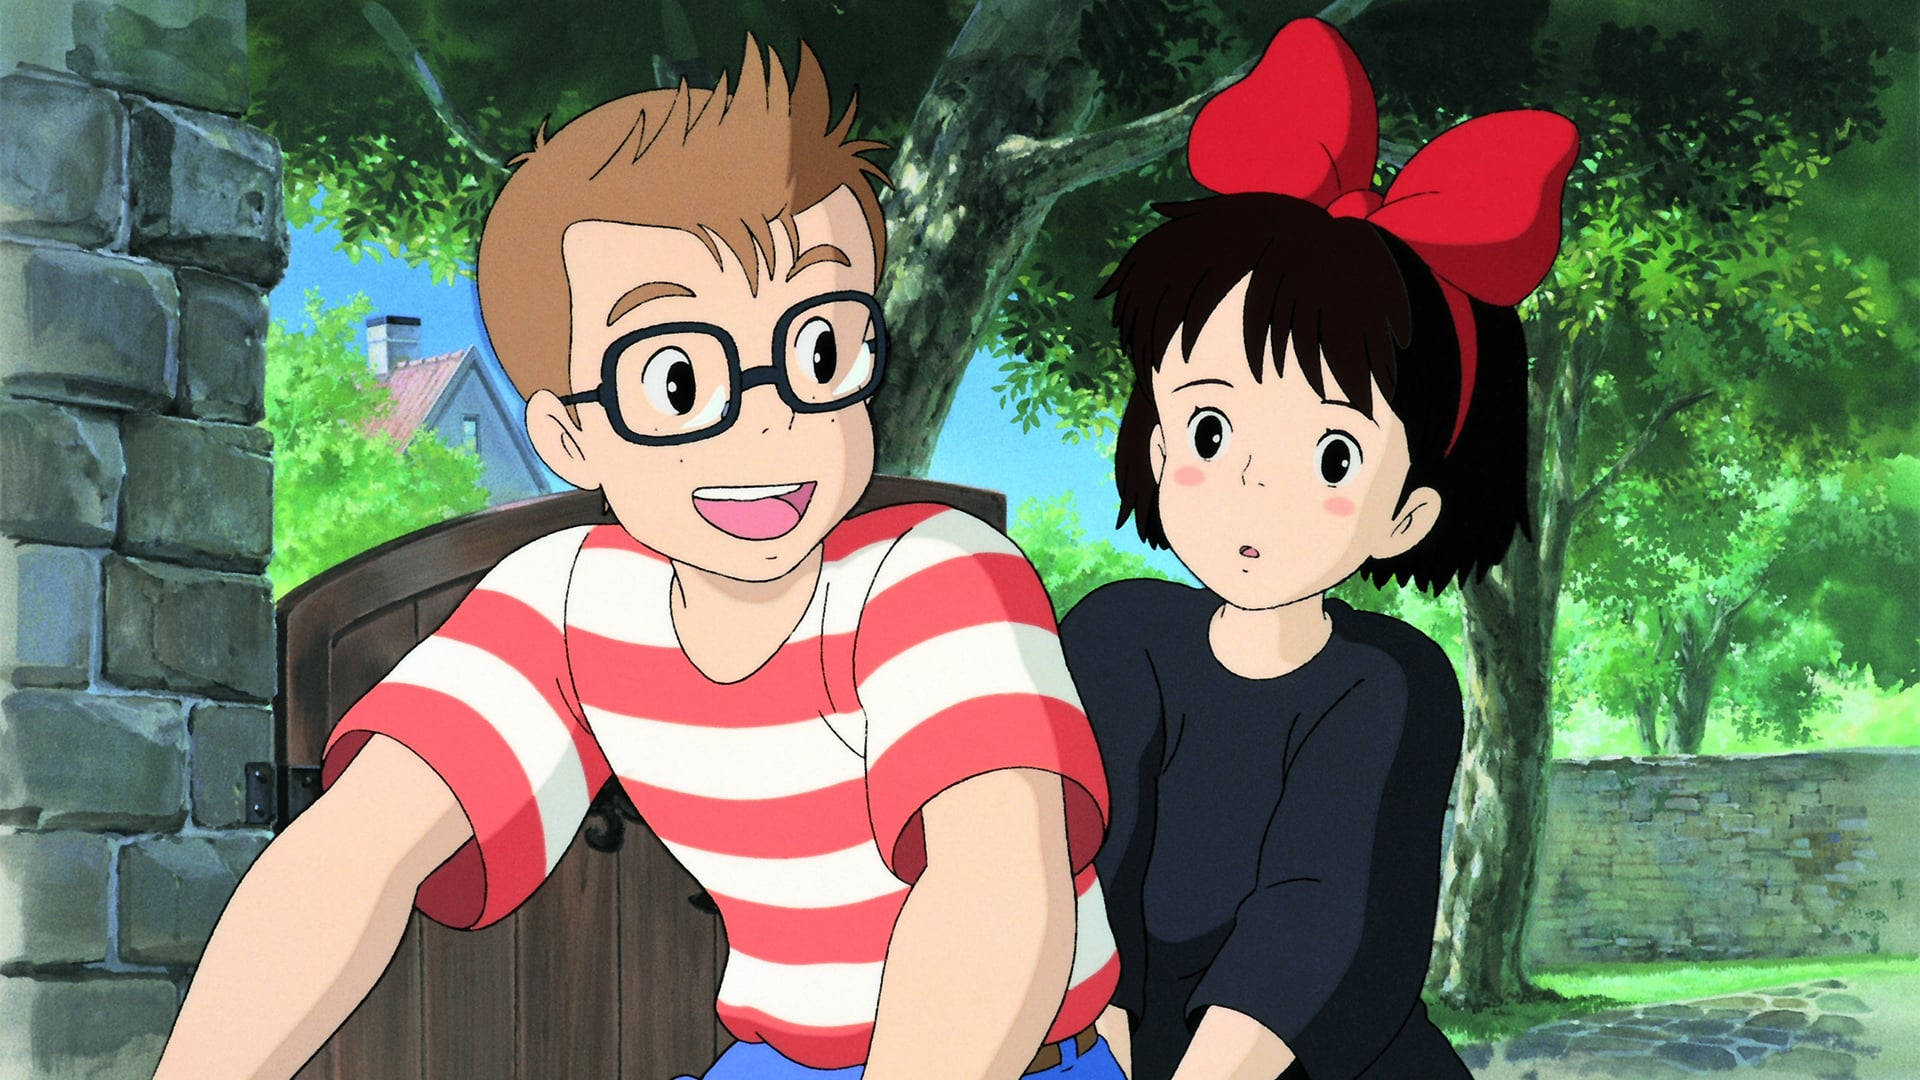 Download Japanese Aesthetic iPhone Kikis Delivery Service Wallpaper   Wallpaperscom